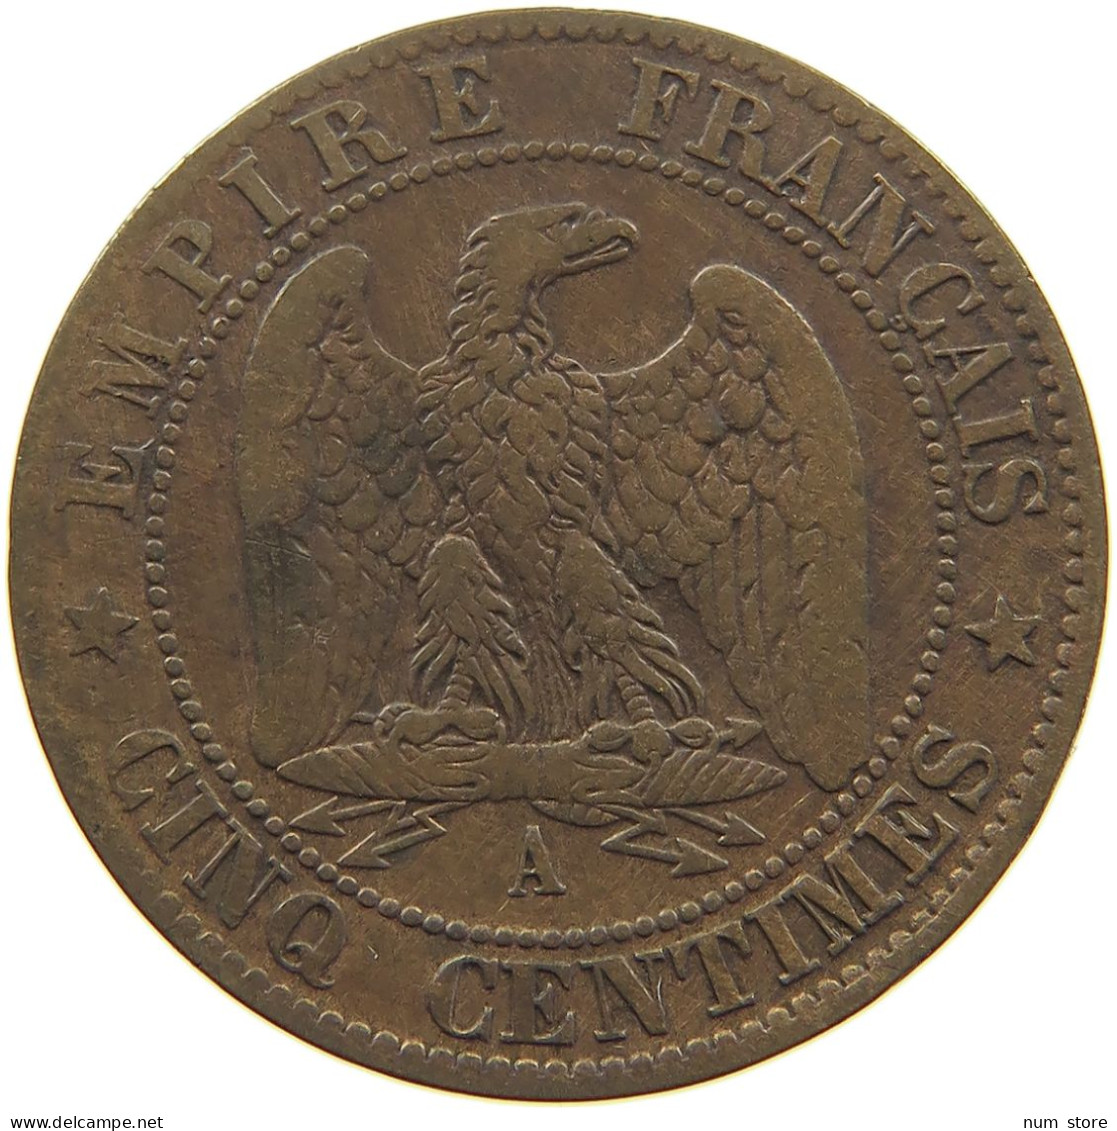 FRANCE 5 CENTIMES 1862 A Napoleon III. (1852-1870) #c080 0337 - 5 Centimes